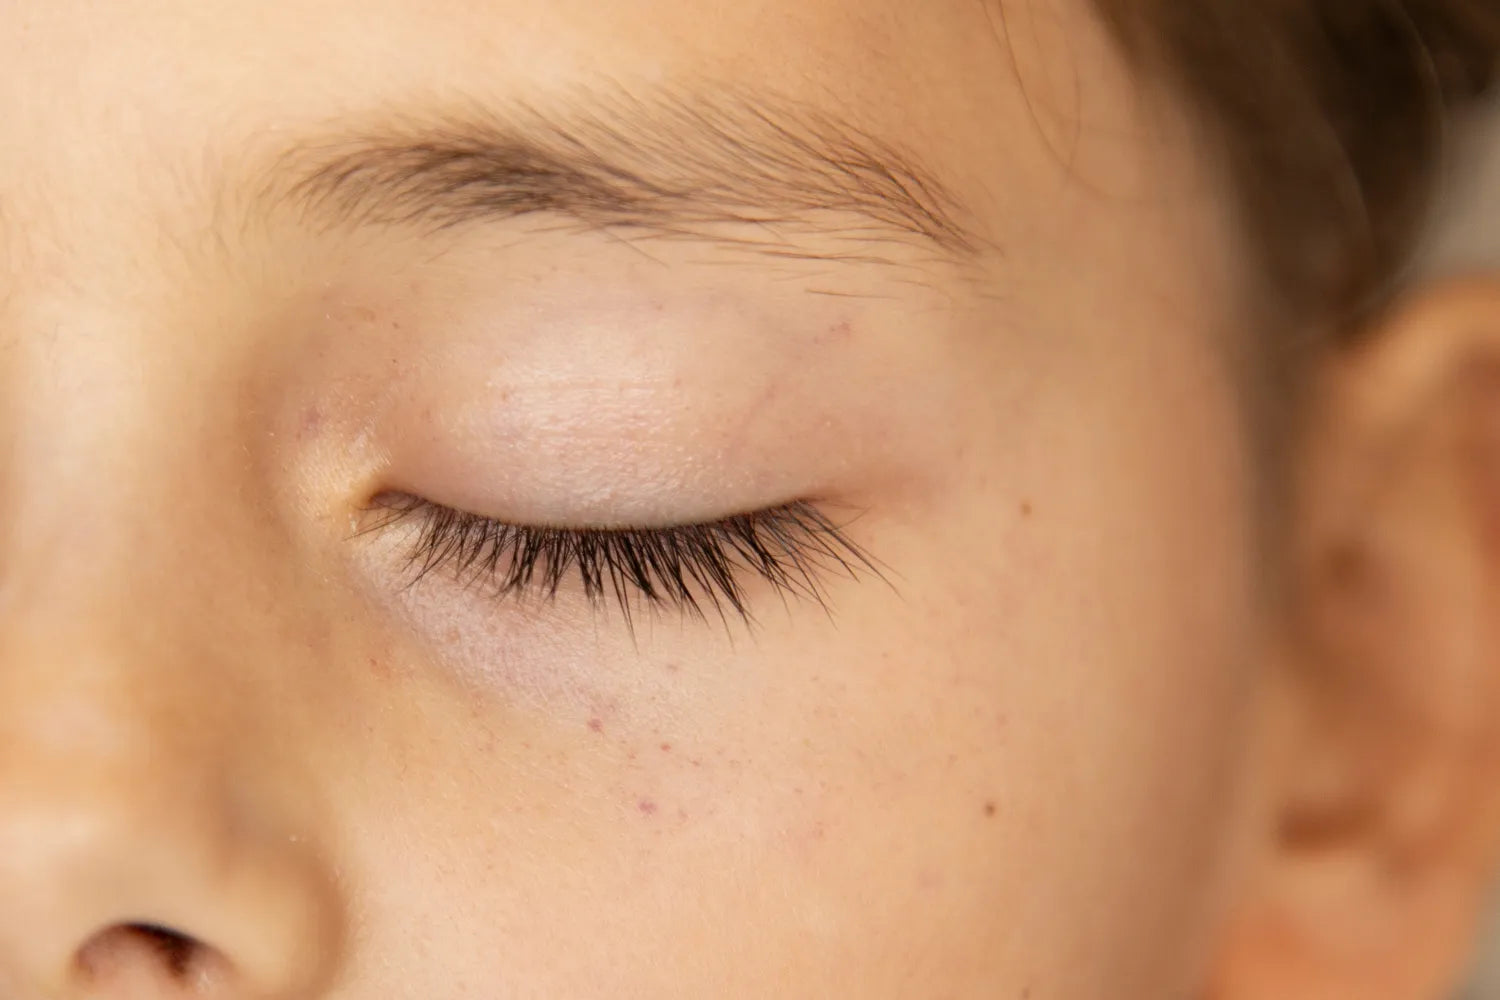 Petechiae in the Eyes: Signs, Causes, and Treatments